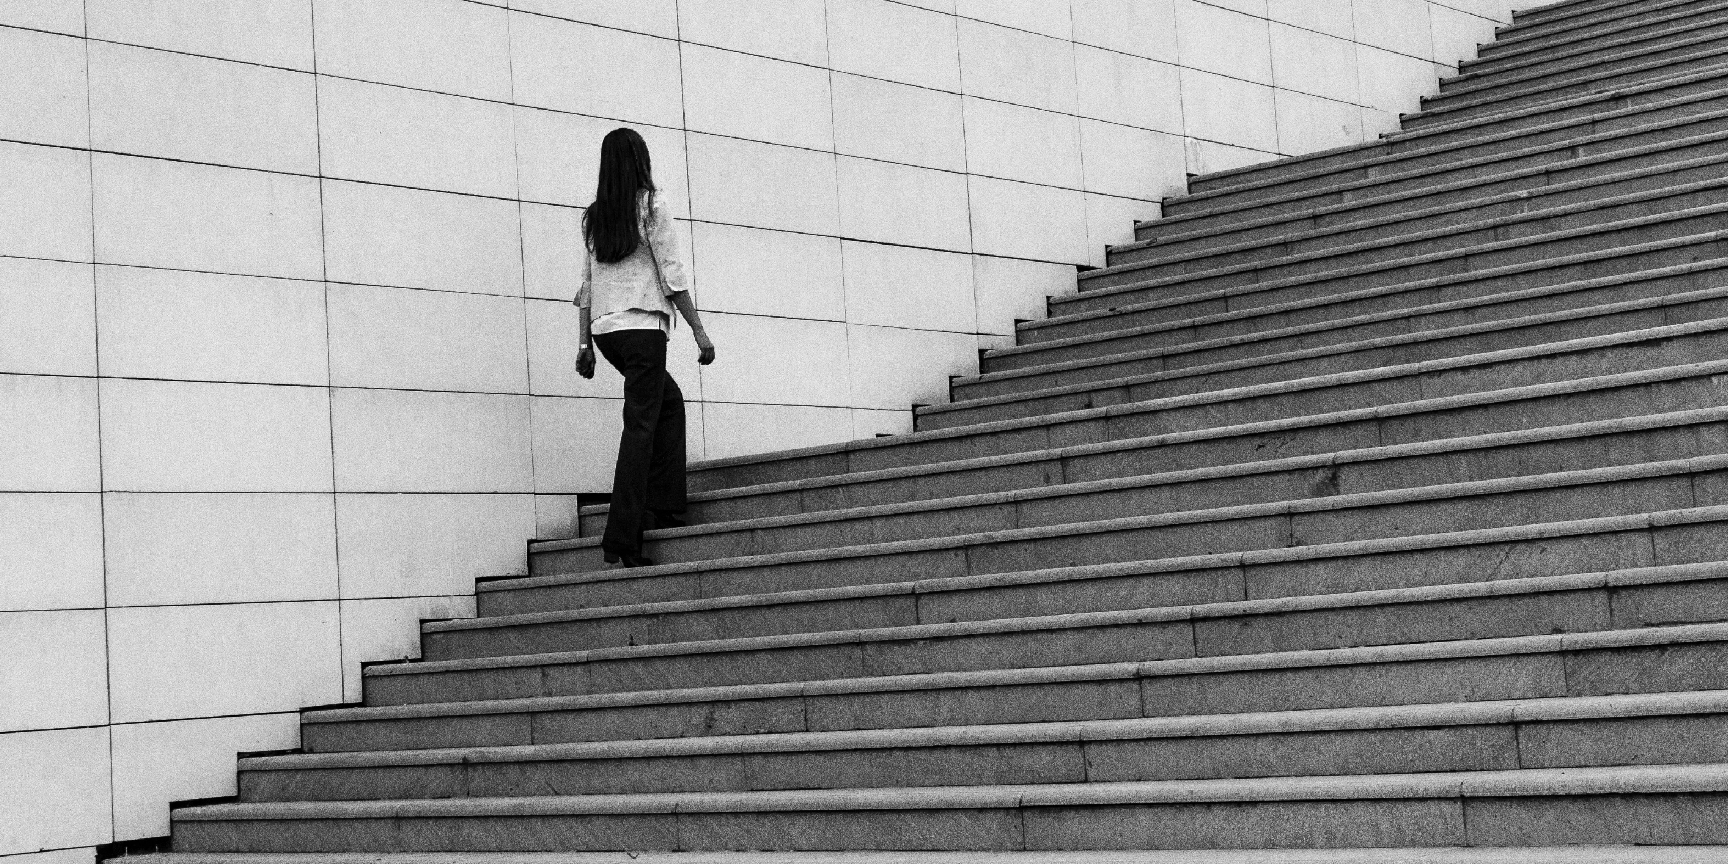 A black and white image of a young woman walking up some steps.